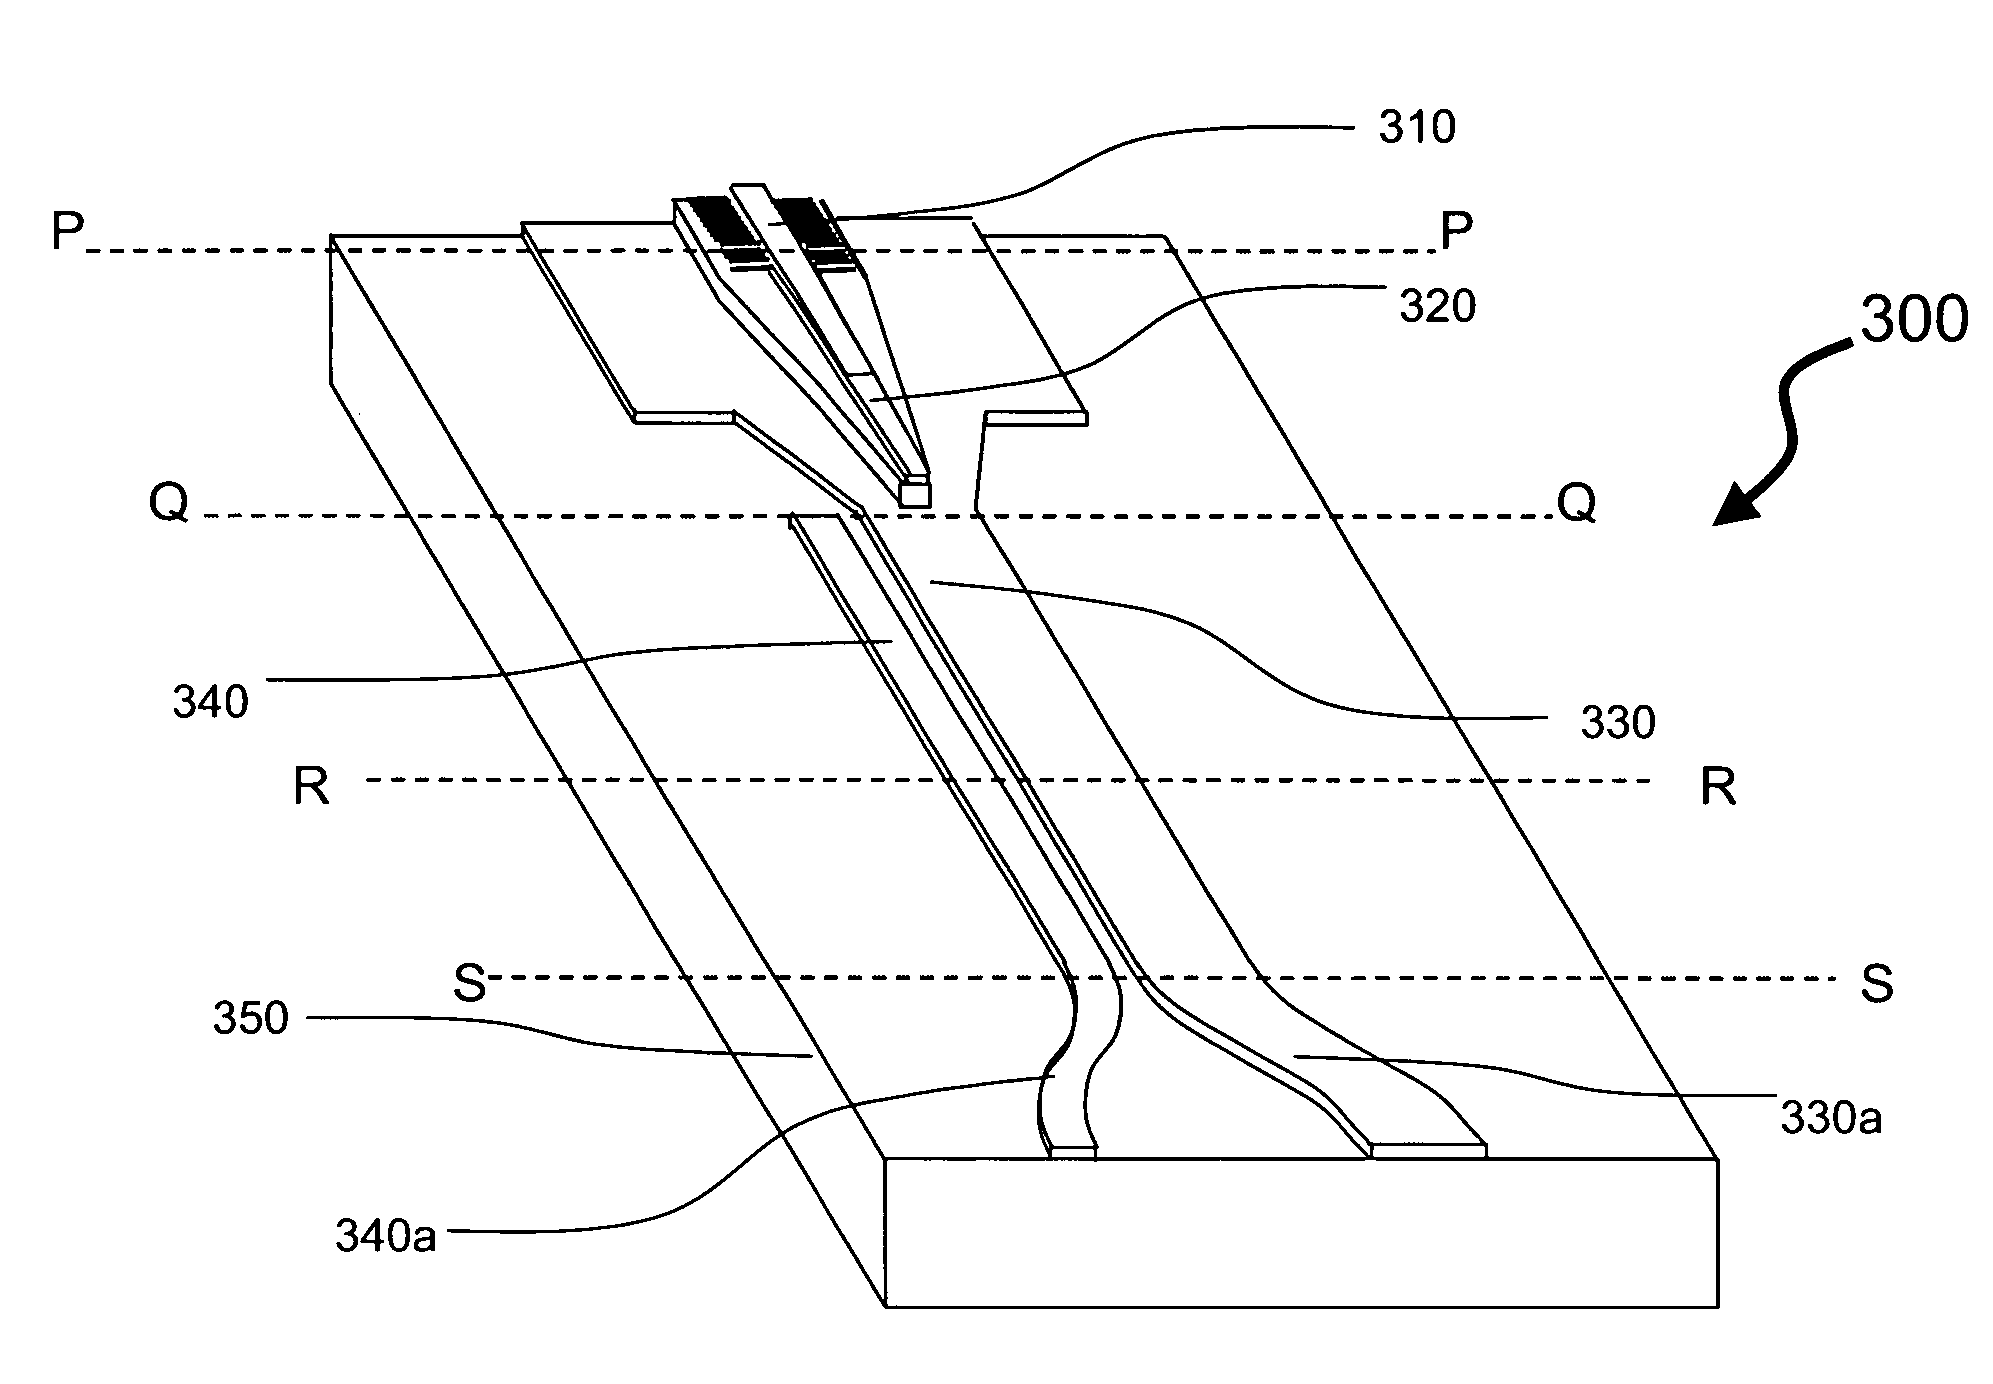 Integrated lateral mode converter